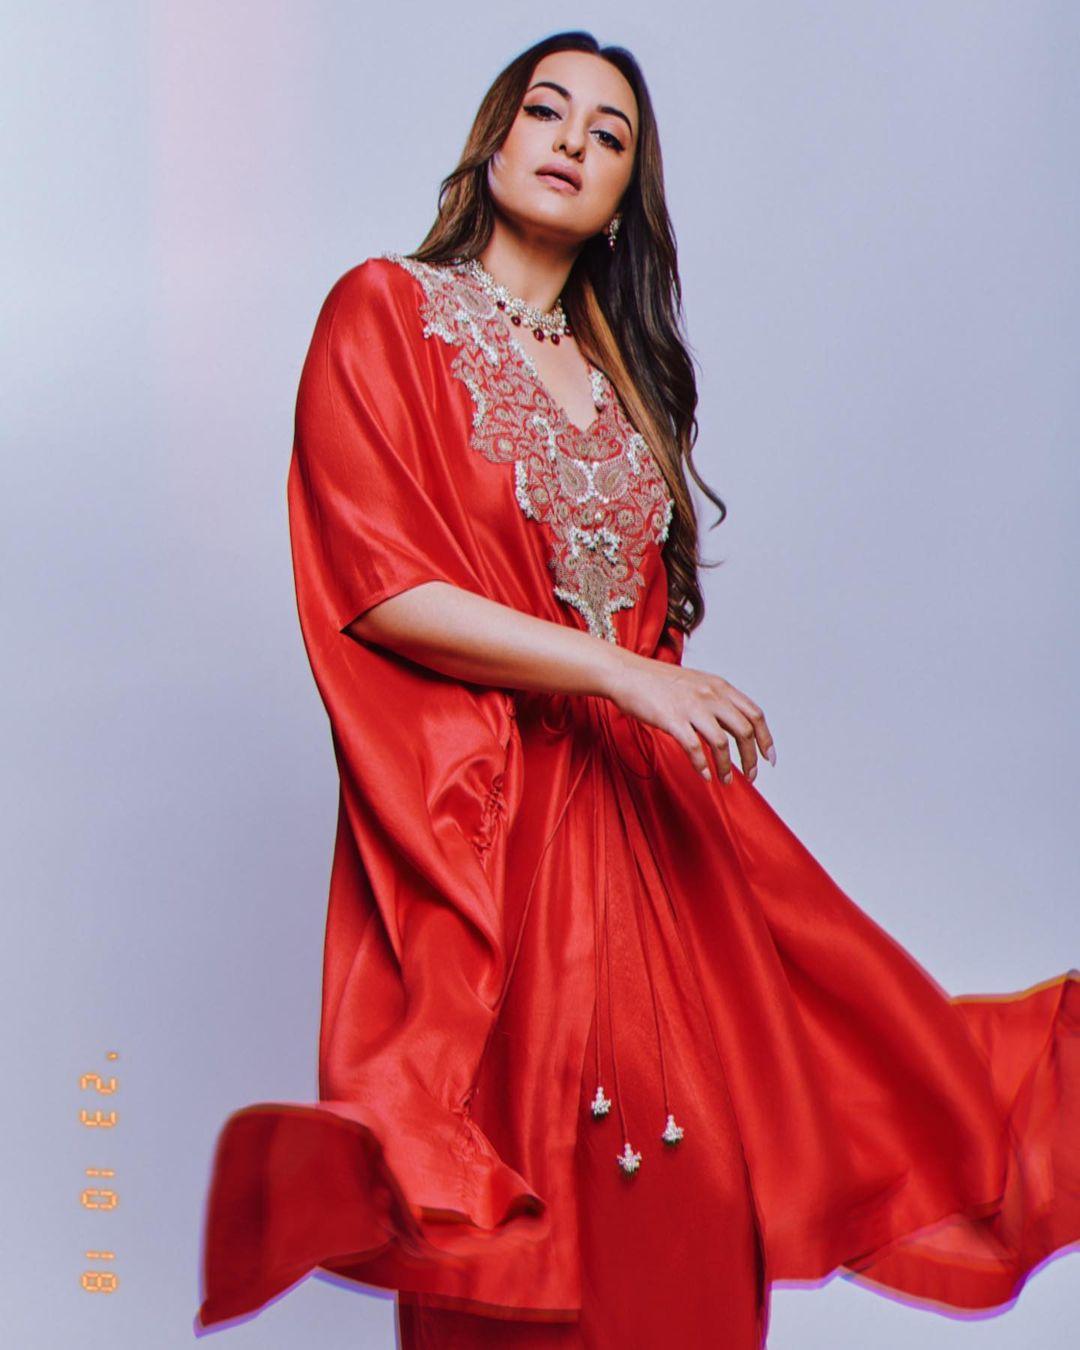  In this look, the actress wore a striking red-colored kurta with stylish dhoti-style bottoms, which struck a balance with ethnic and modern glam